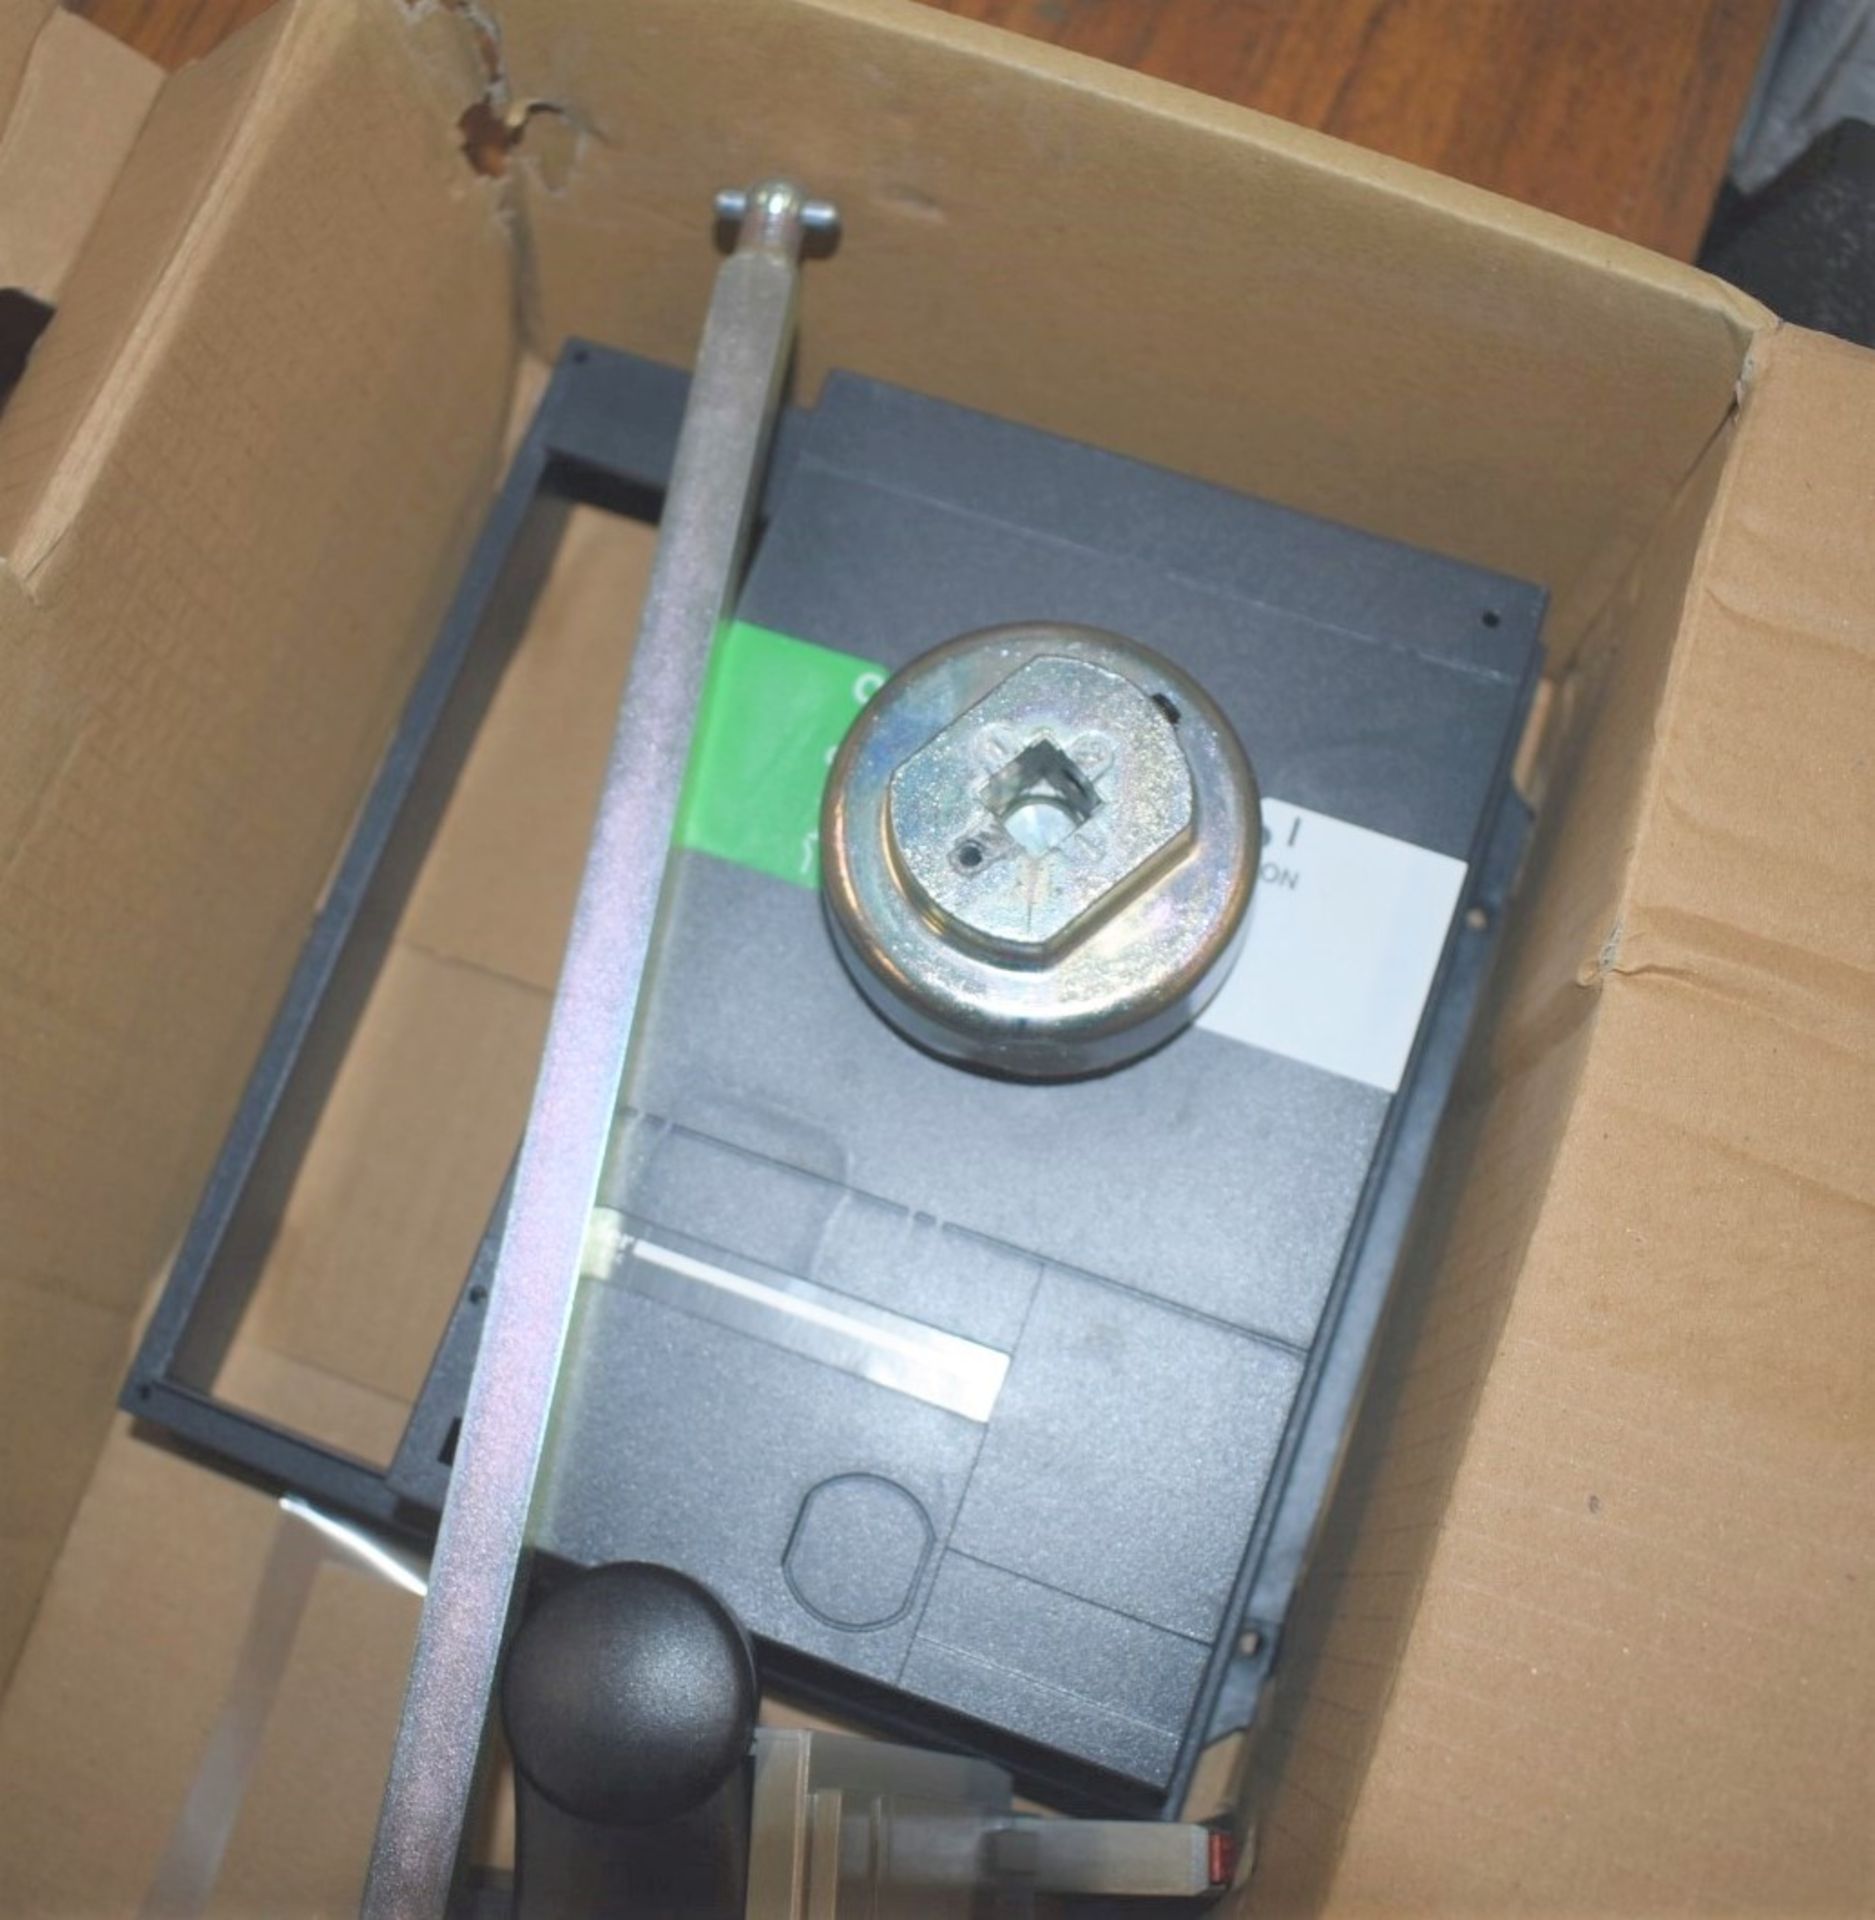 1 x Schneider Electric Front Rotary On/Off Handle Extension - Type: 33778 - Unused in Original Box - Image 9 of 9